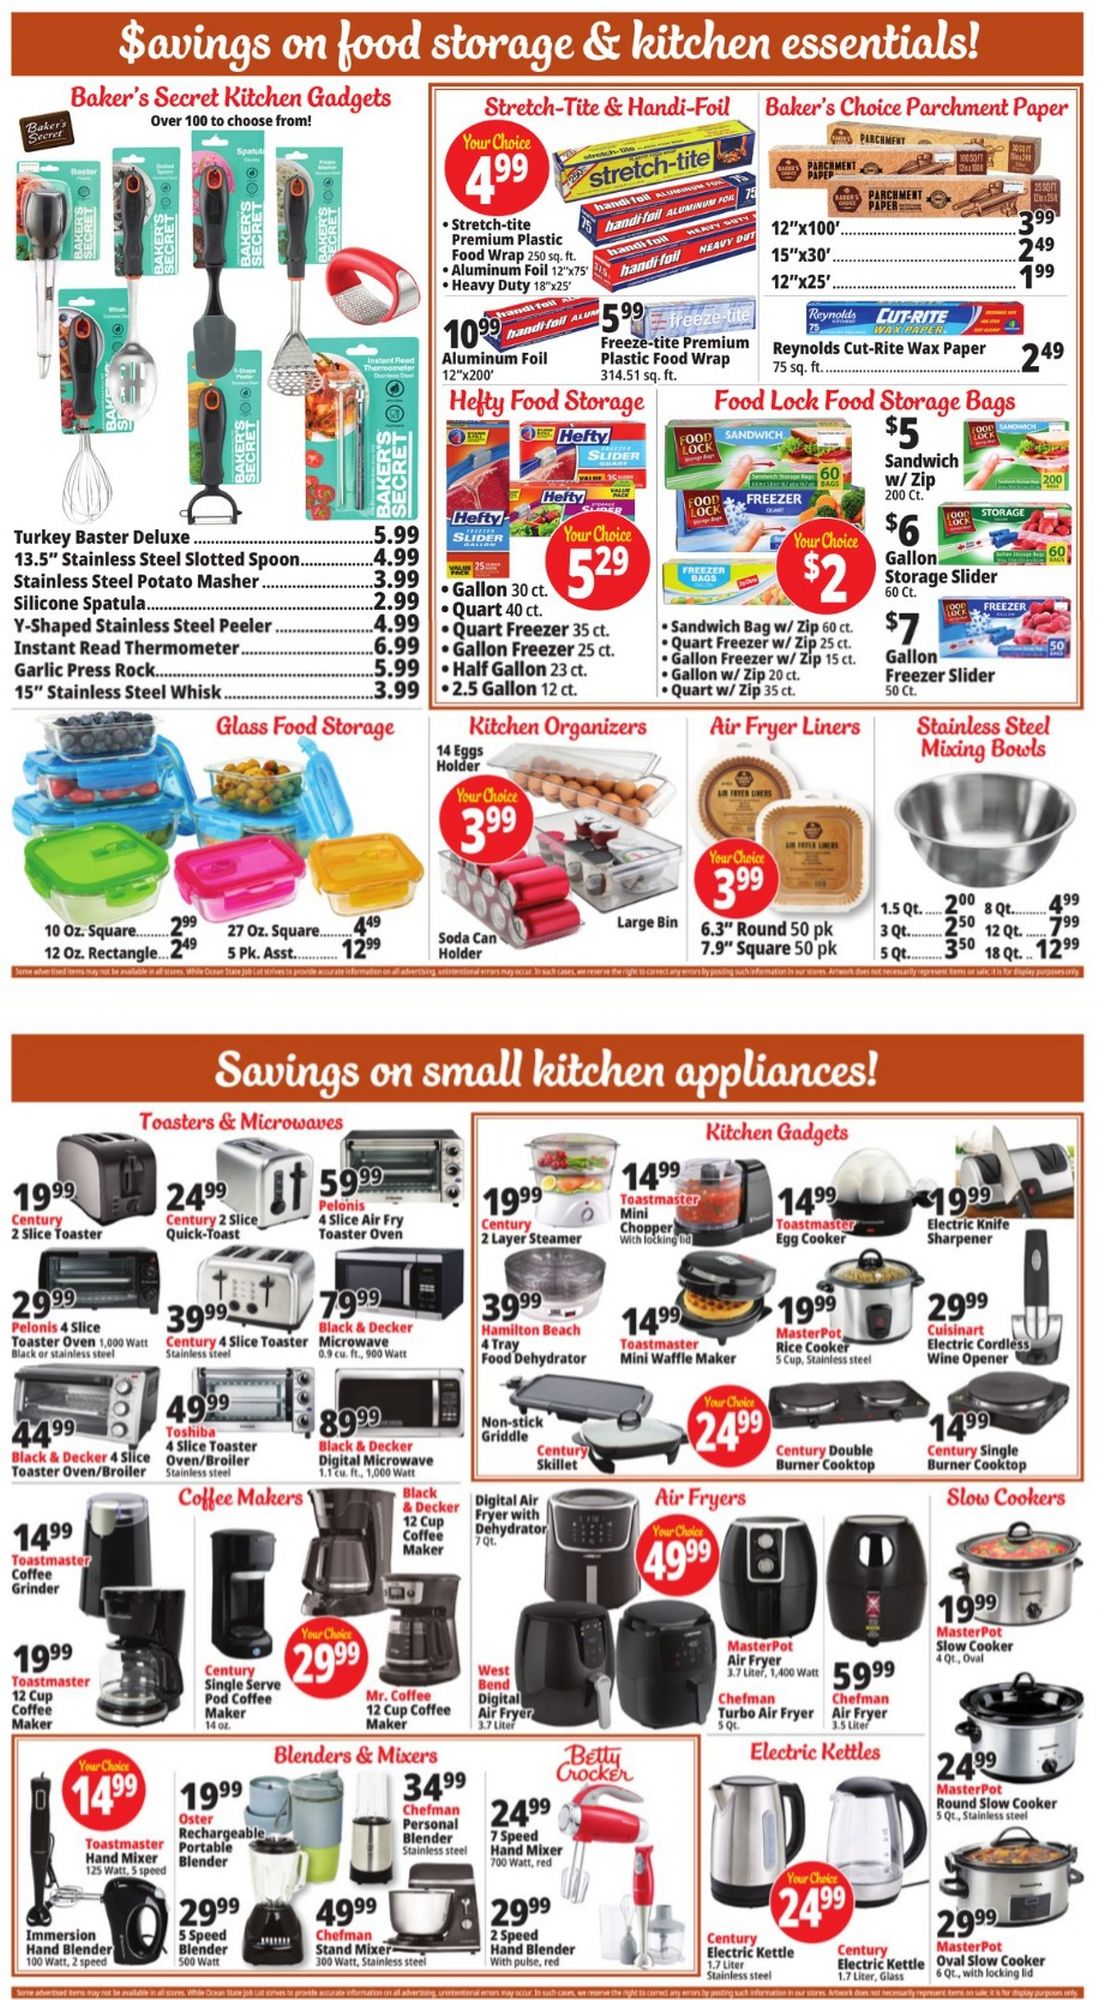 Ocean State Job Lot Black Friday July 2024 Weekly Sales, Deals, Discounts and Digital Coupons.